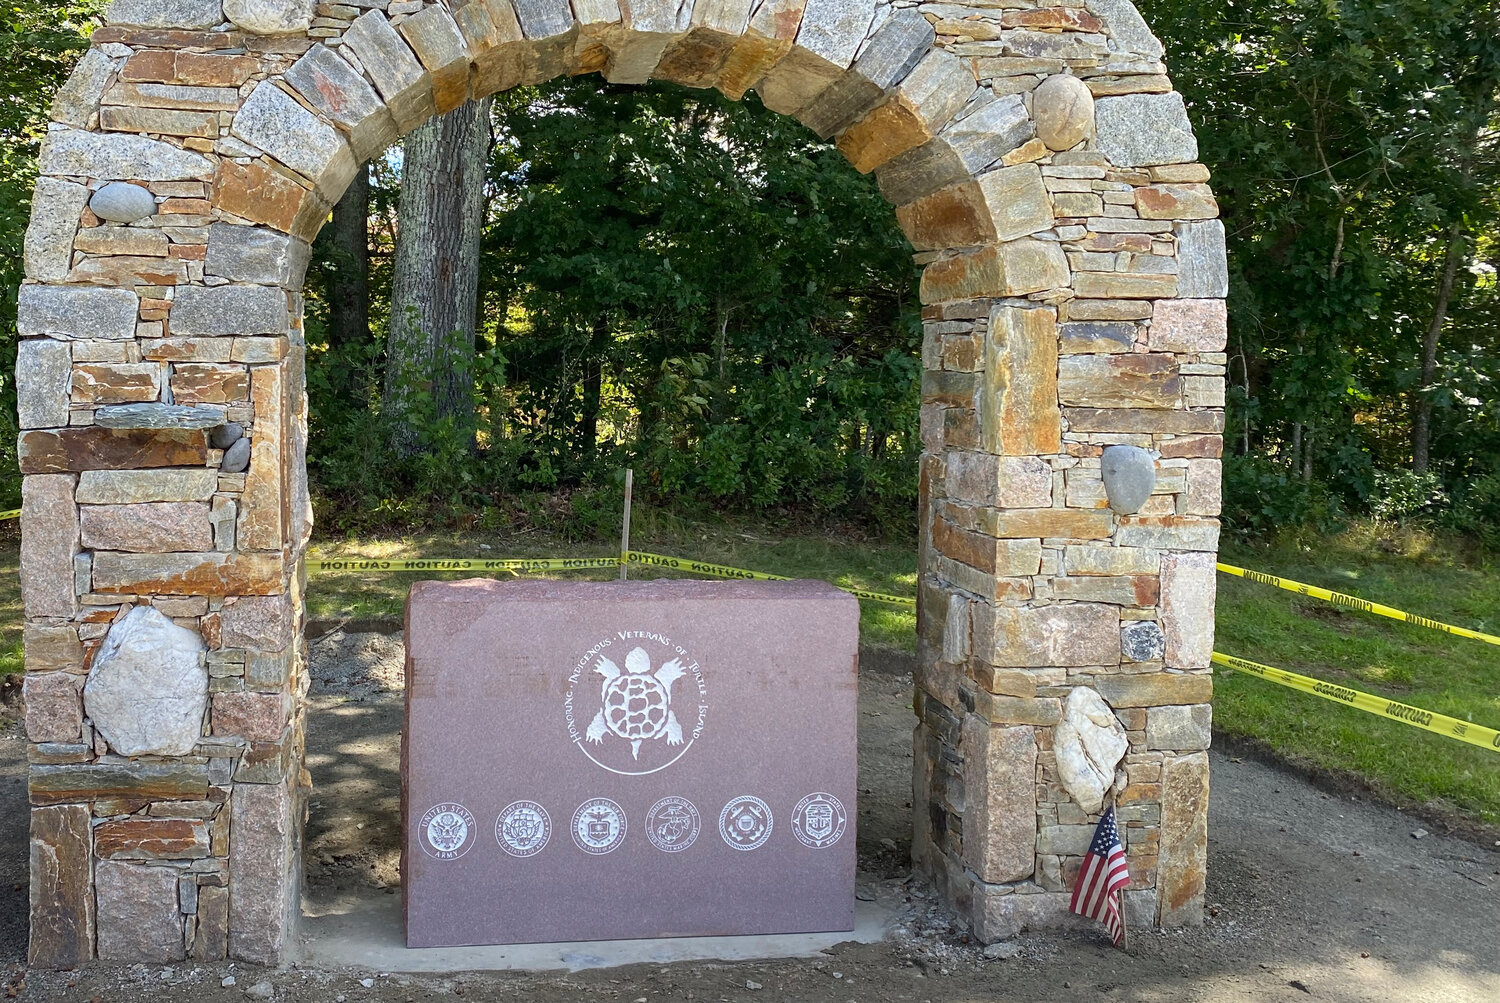 The recently dedicated monument honoring Indigenous veterans at the Rhode Island Veterans Memorial Cemetery